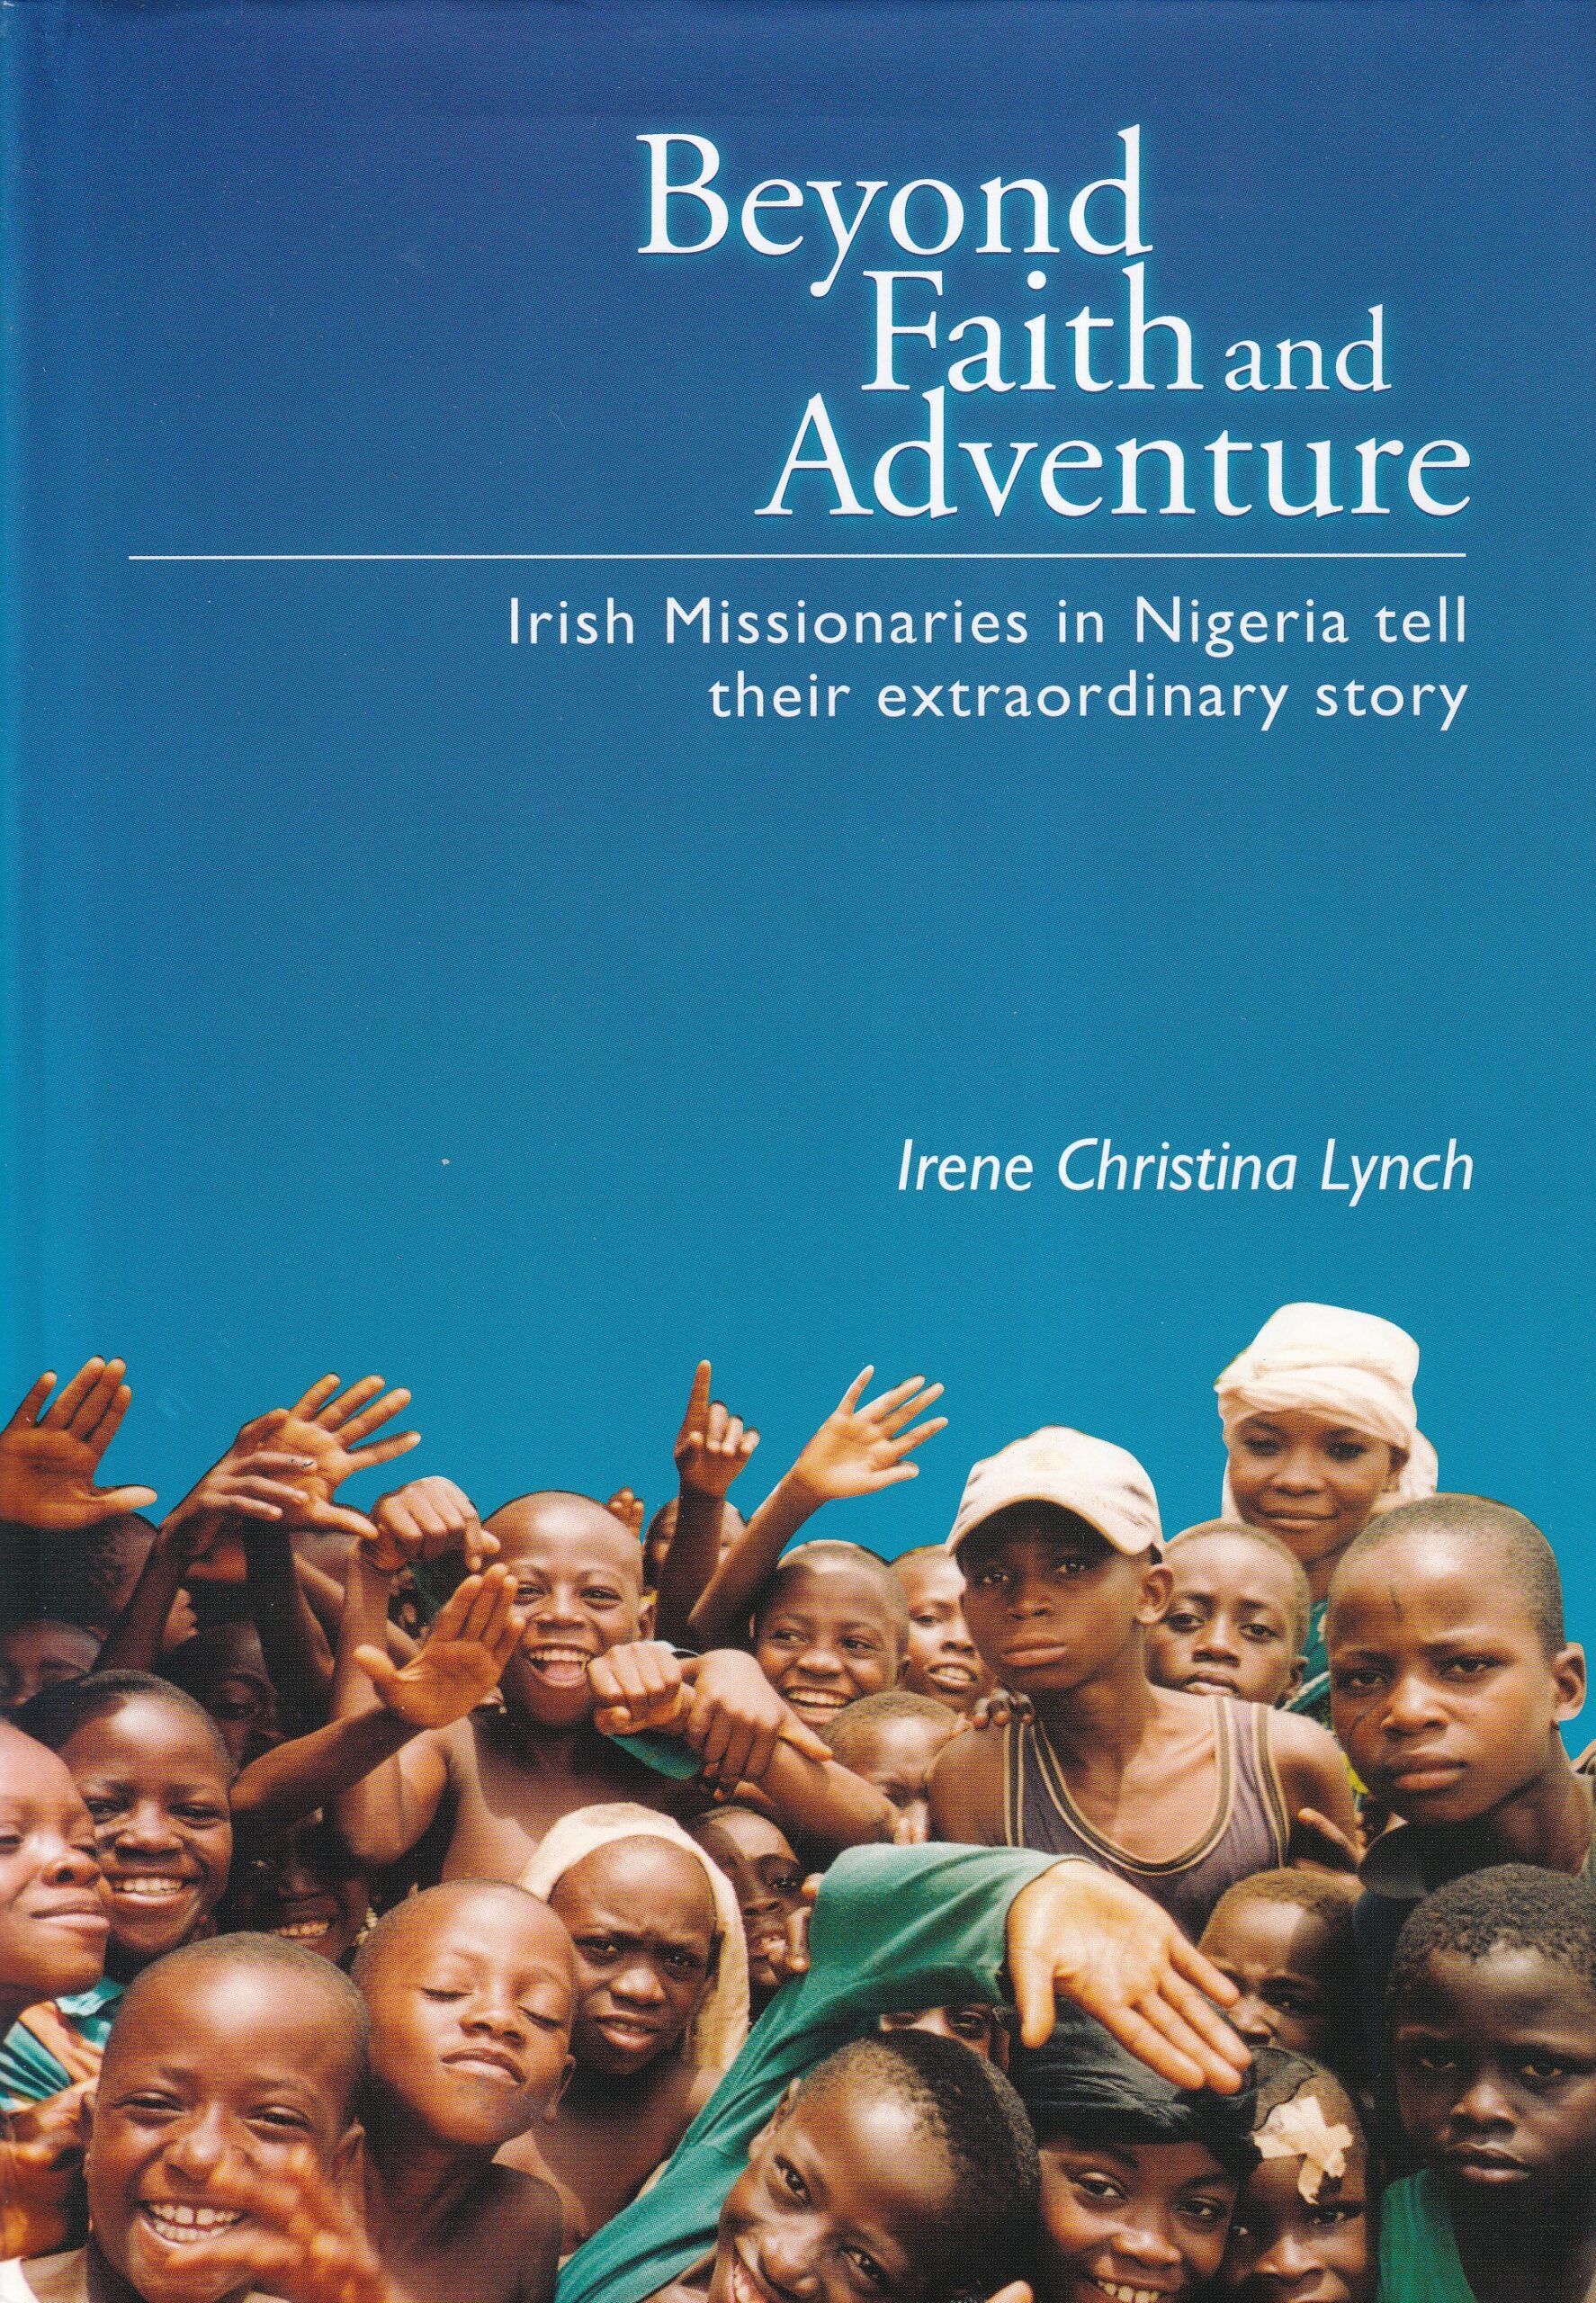 Beyond Faith and Adventure: Irish Missionaries in Nigeria Tell Their Extraordinary Story | Irene Christina Lynch | Charlie Byrne's